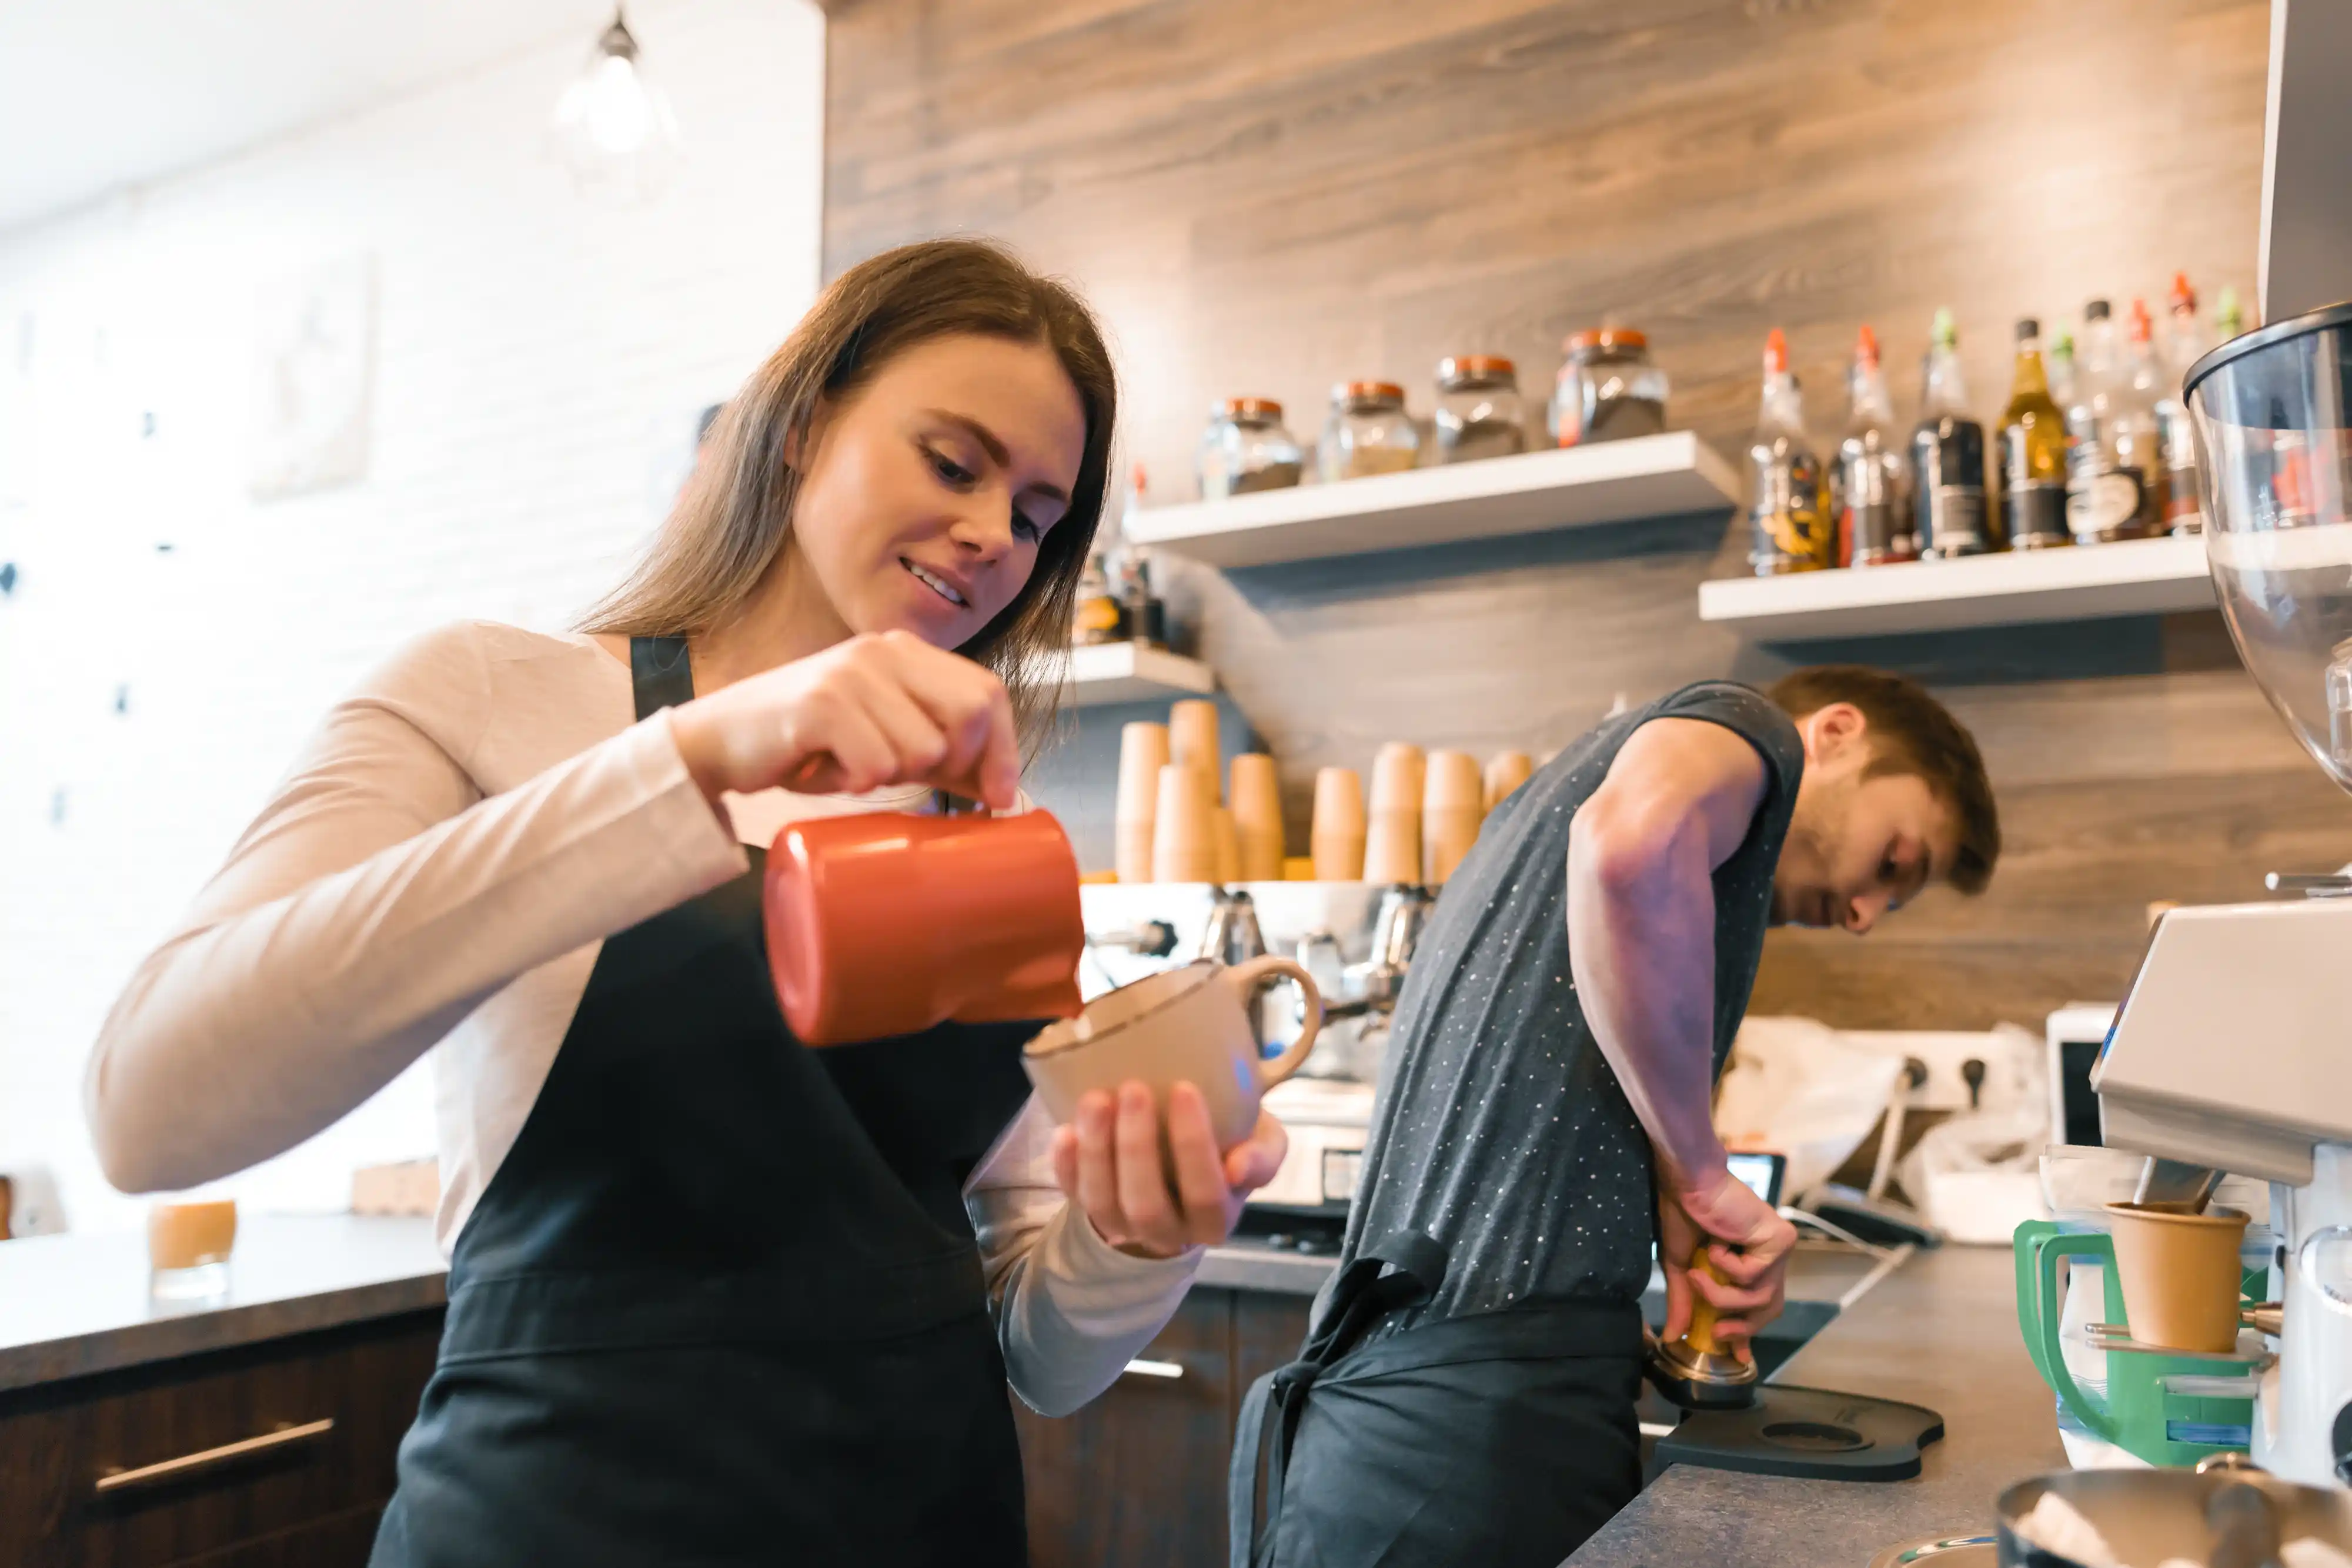 Woman Working as a Barista Pouring Coffee